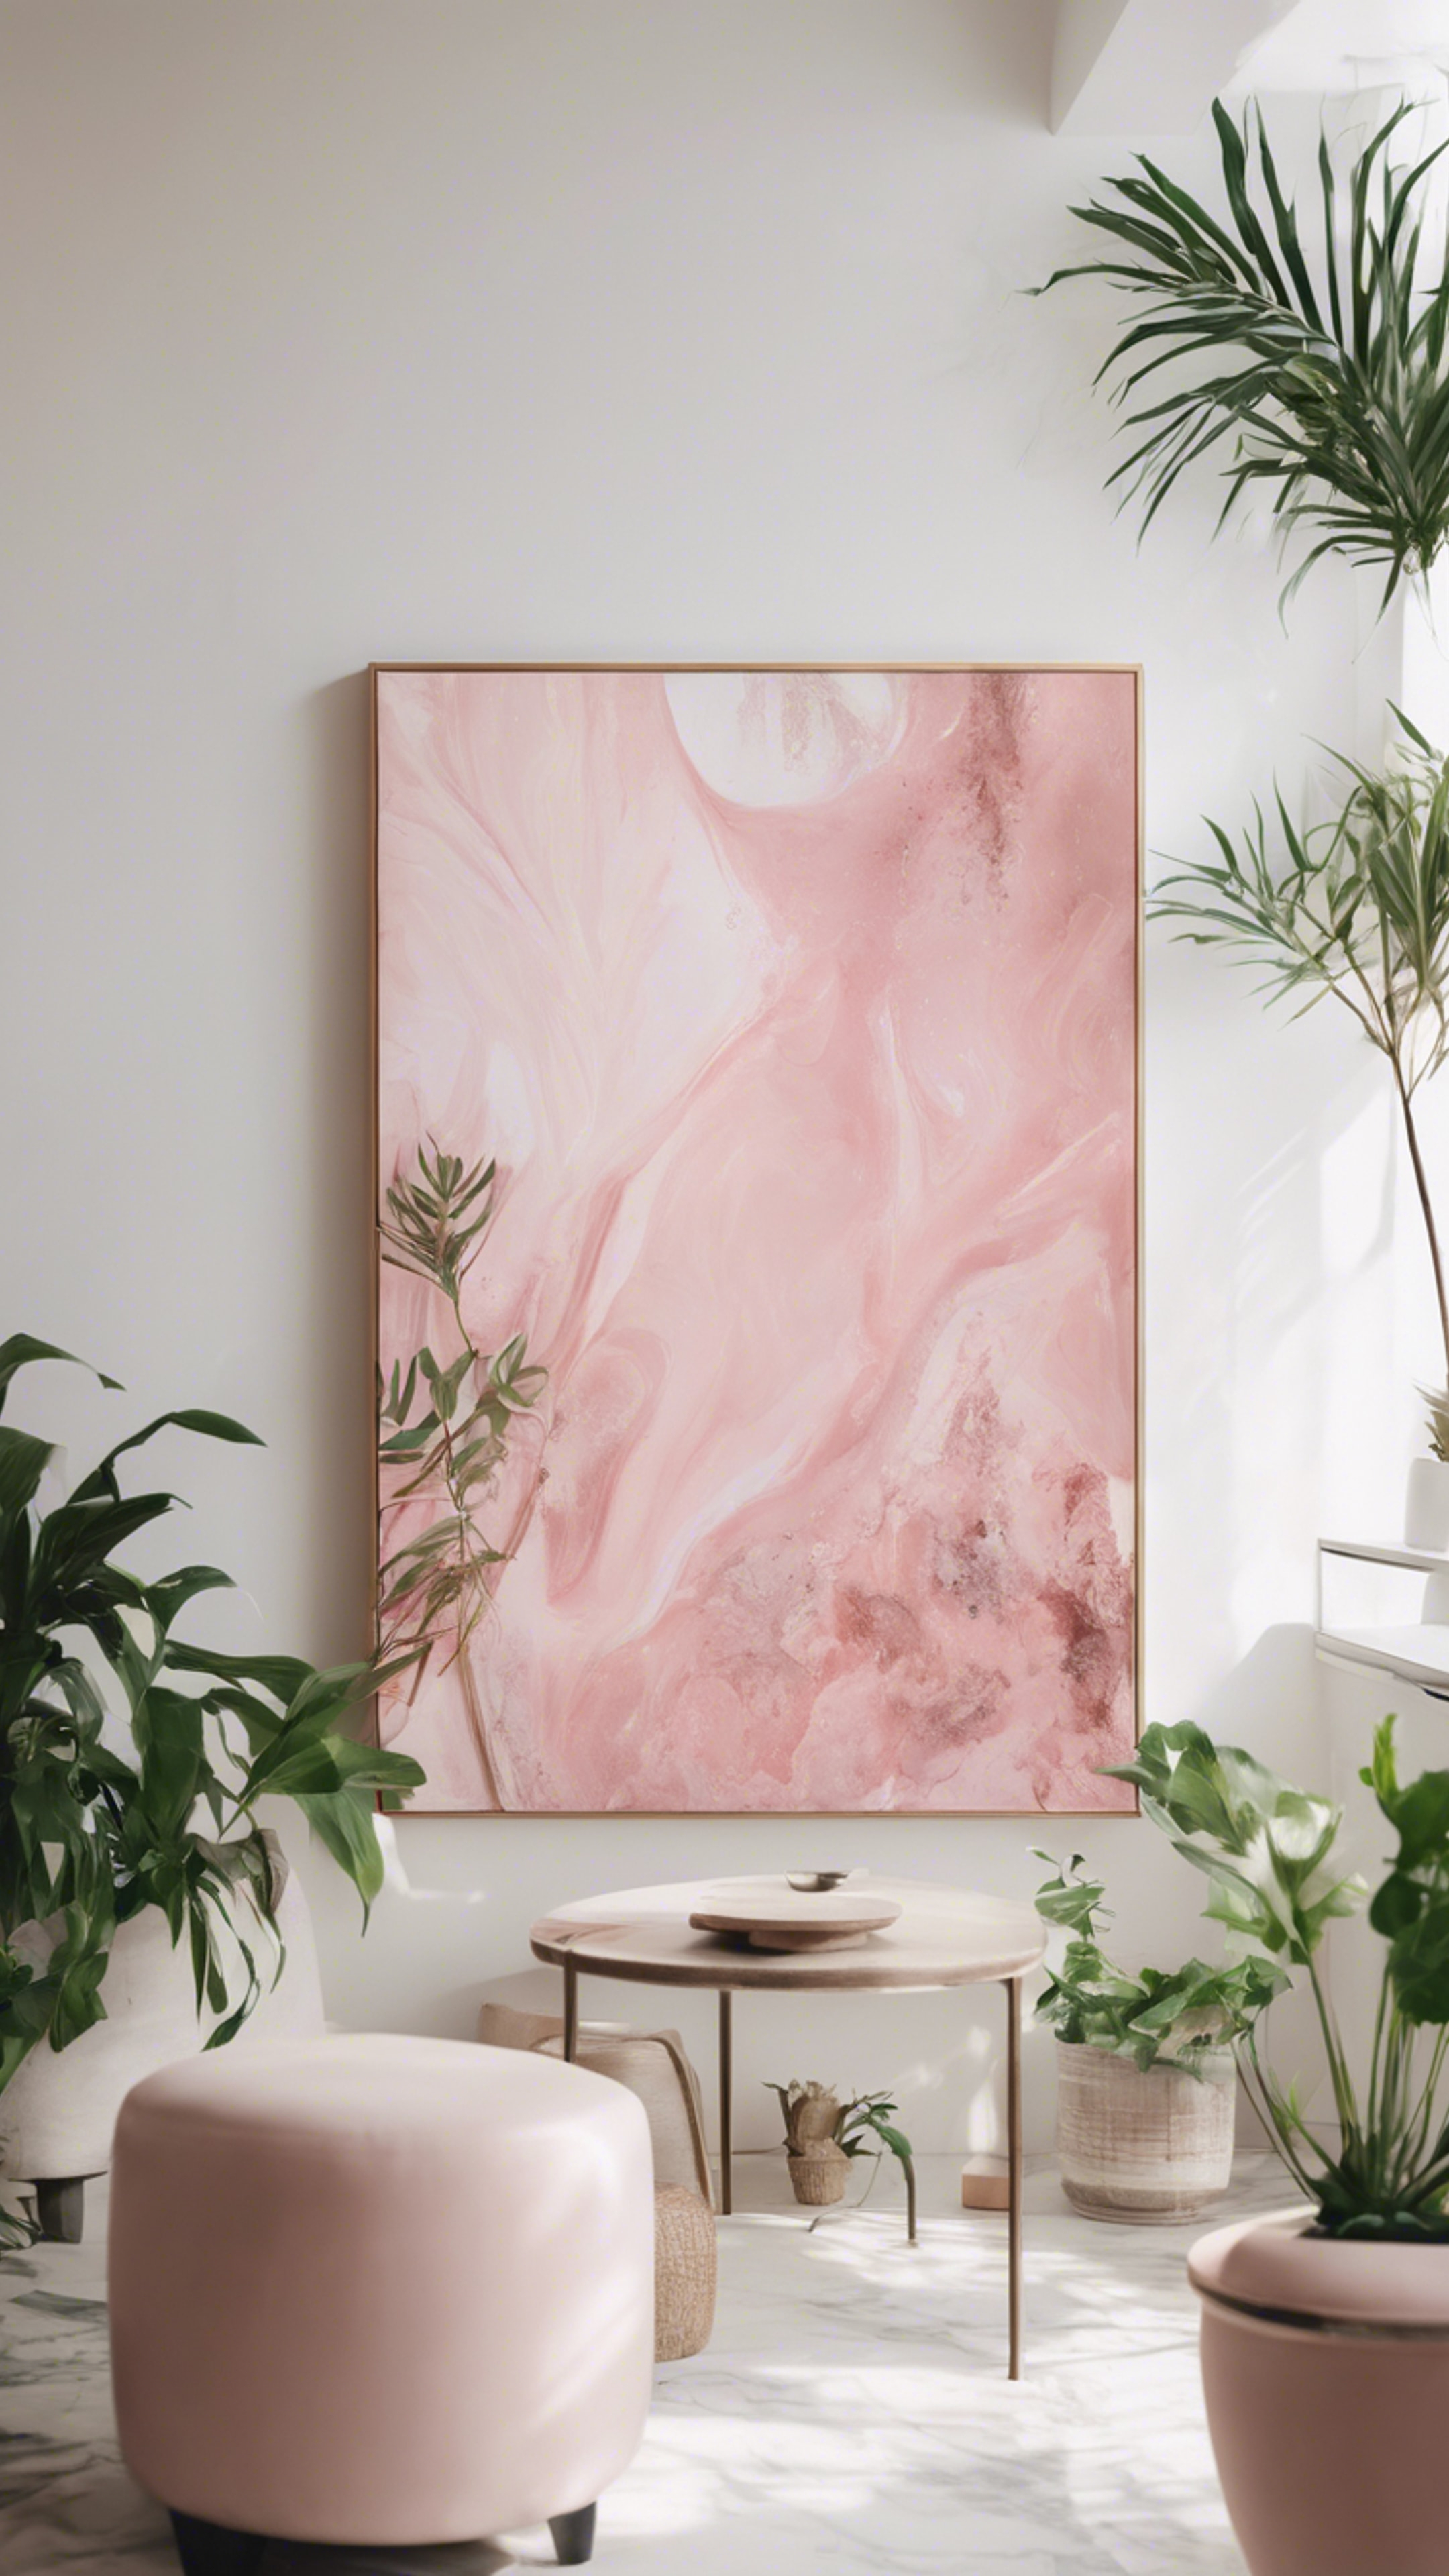 A soft pink abstract painting on a white wall surrounded by indoor plants, enhancing the aesthetic of the room ផ្ទាំង​រូបភាព[9fa4f1f3650f4fbb9955]